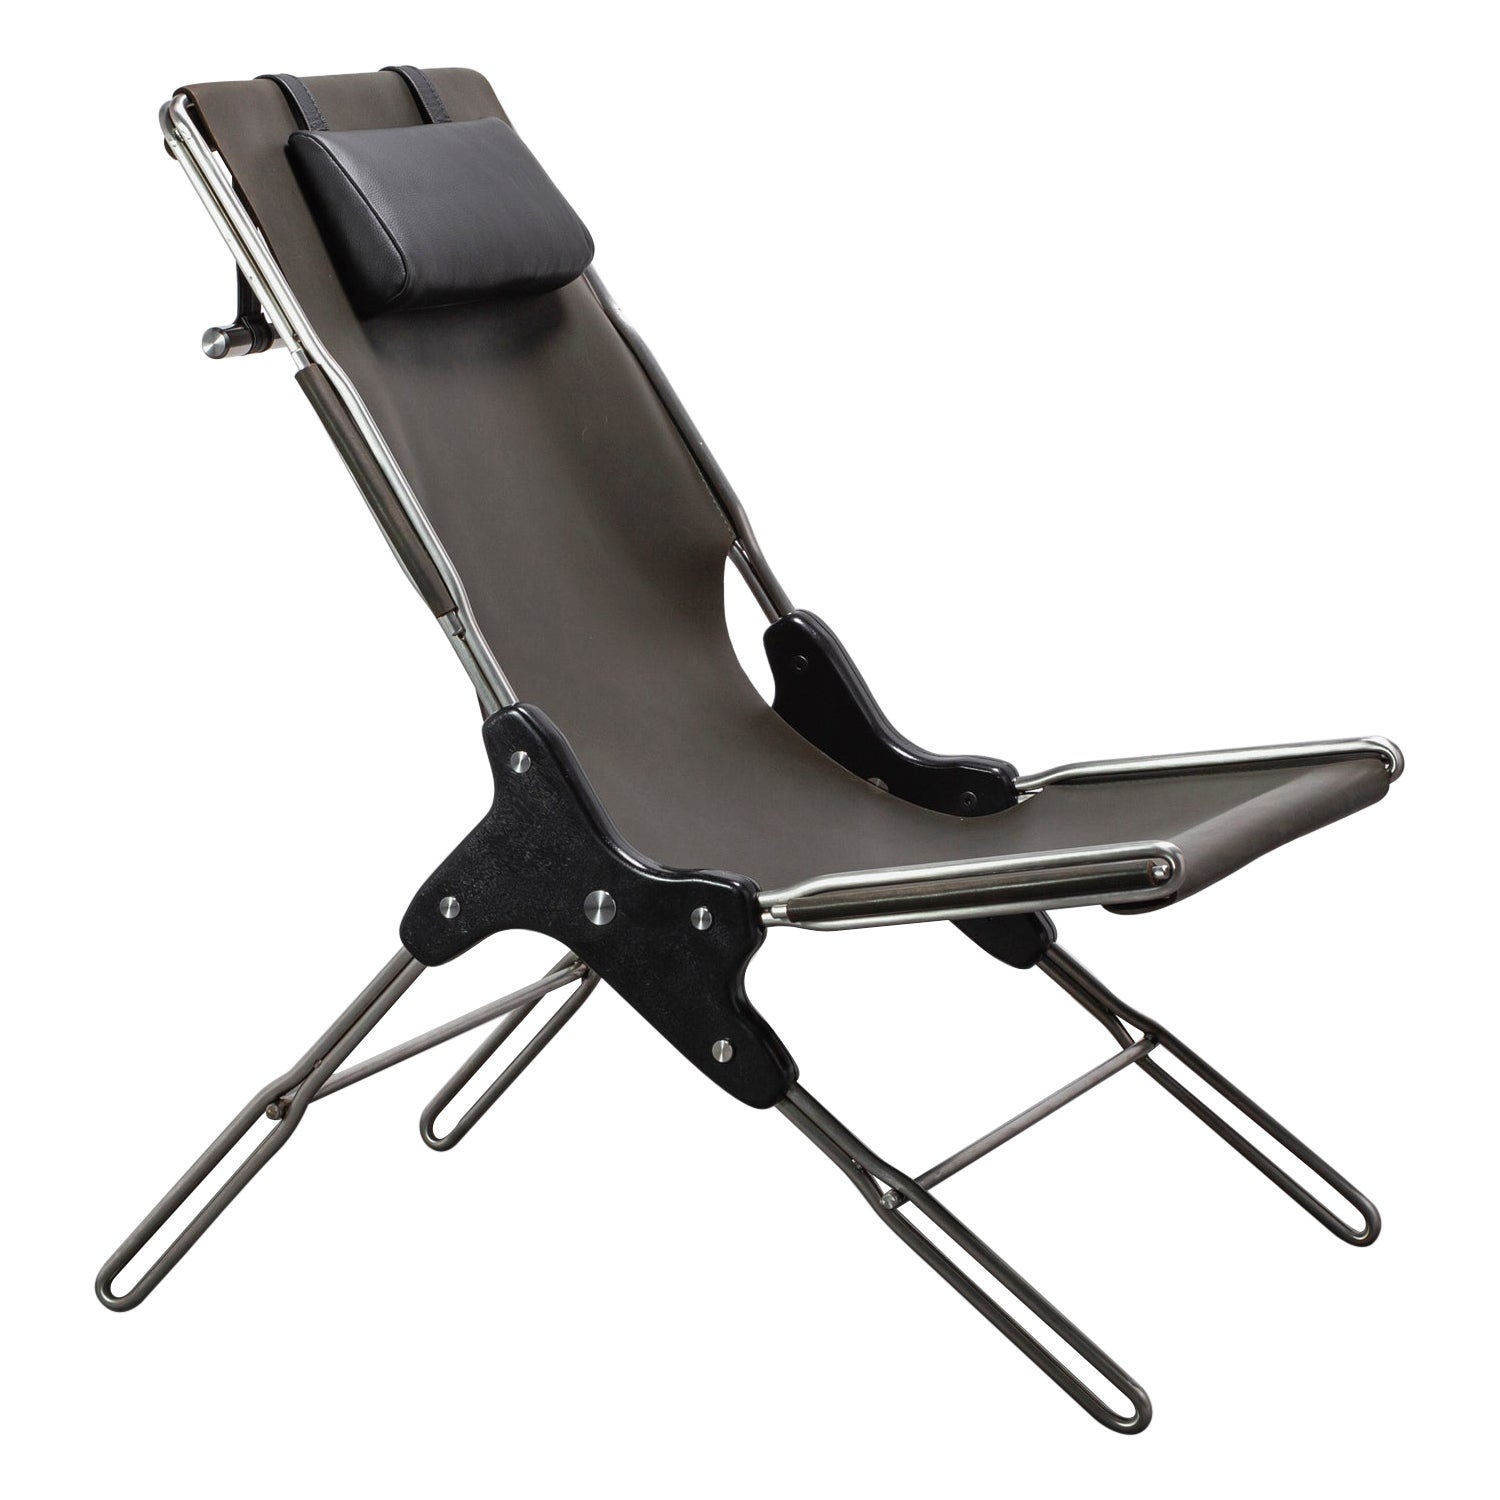 PERFIDIA_01 Olivo Thick Leather Sling Lounge Chair in Stainless Steel by ANDEAN For Sale